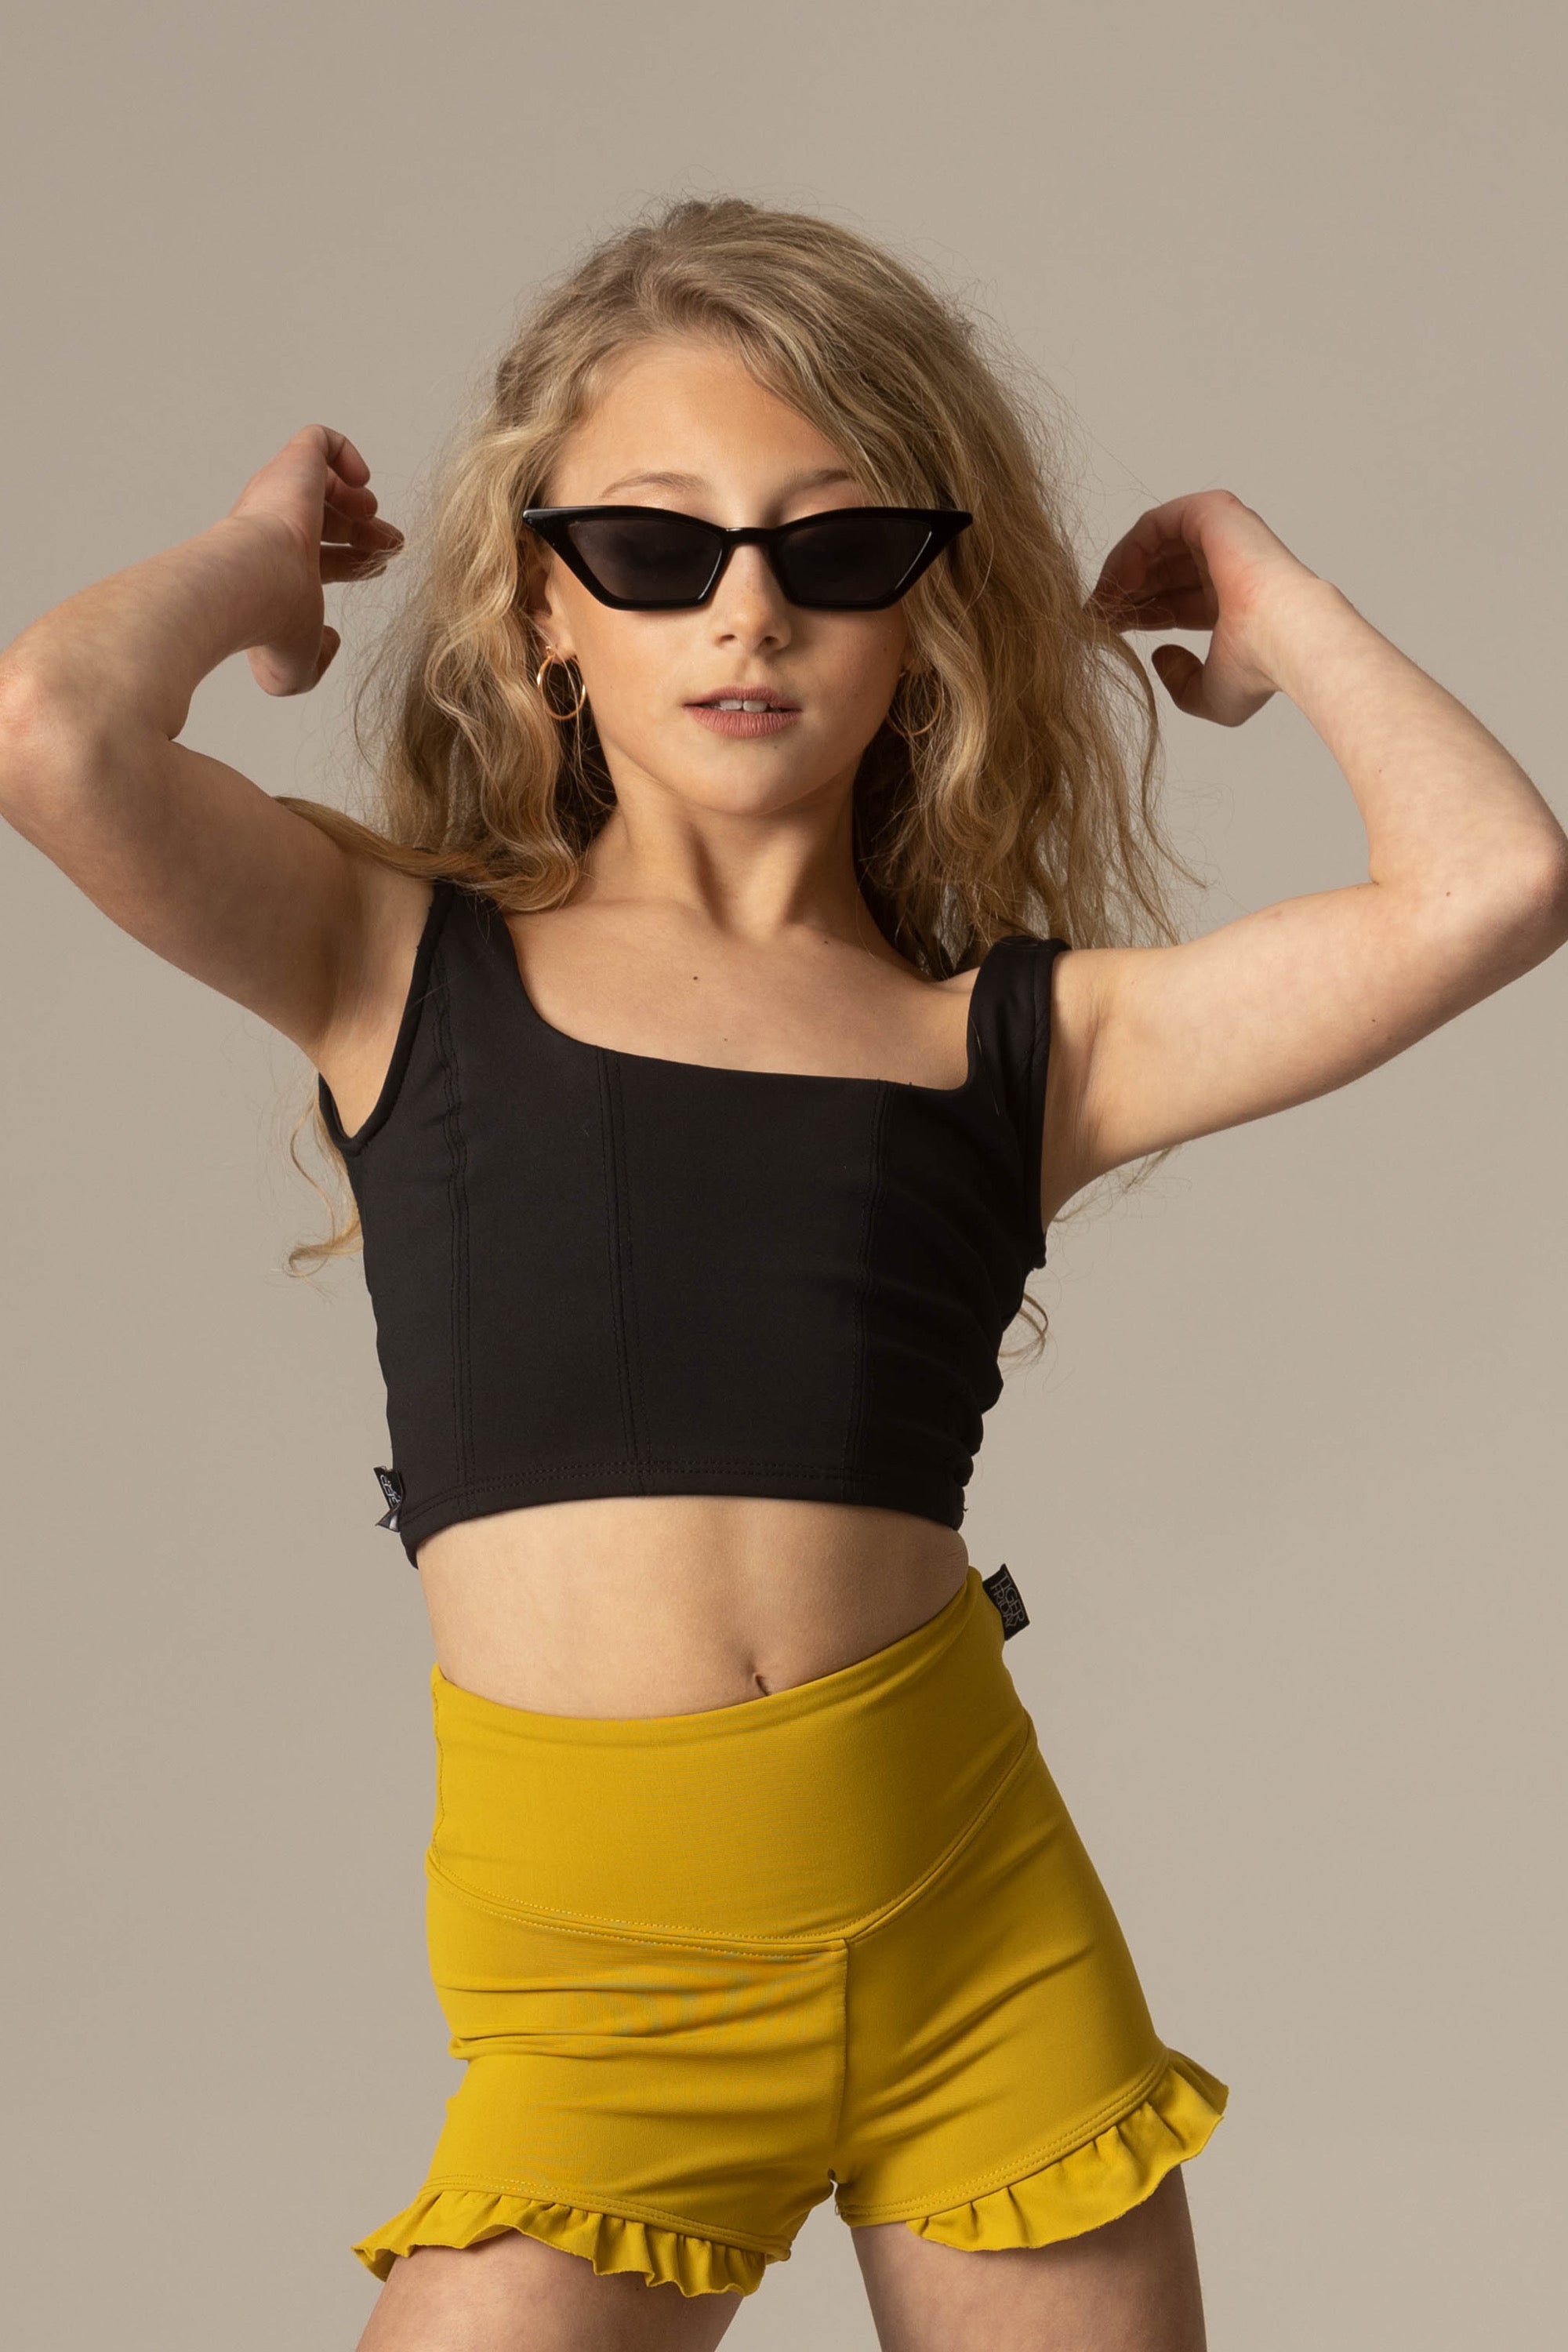 Tiger Friday Online Shop for Duchess Crop Top - Black Dancewear - Size: Adult Small